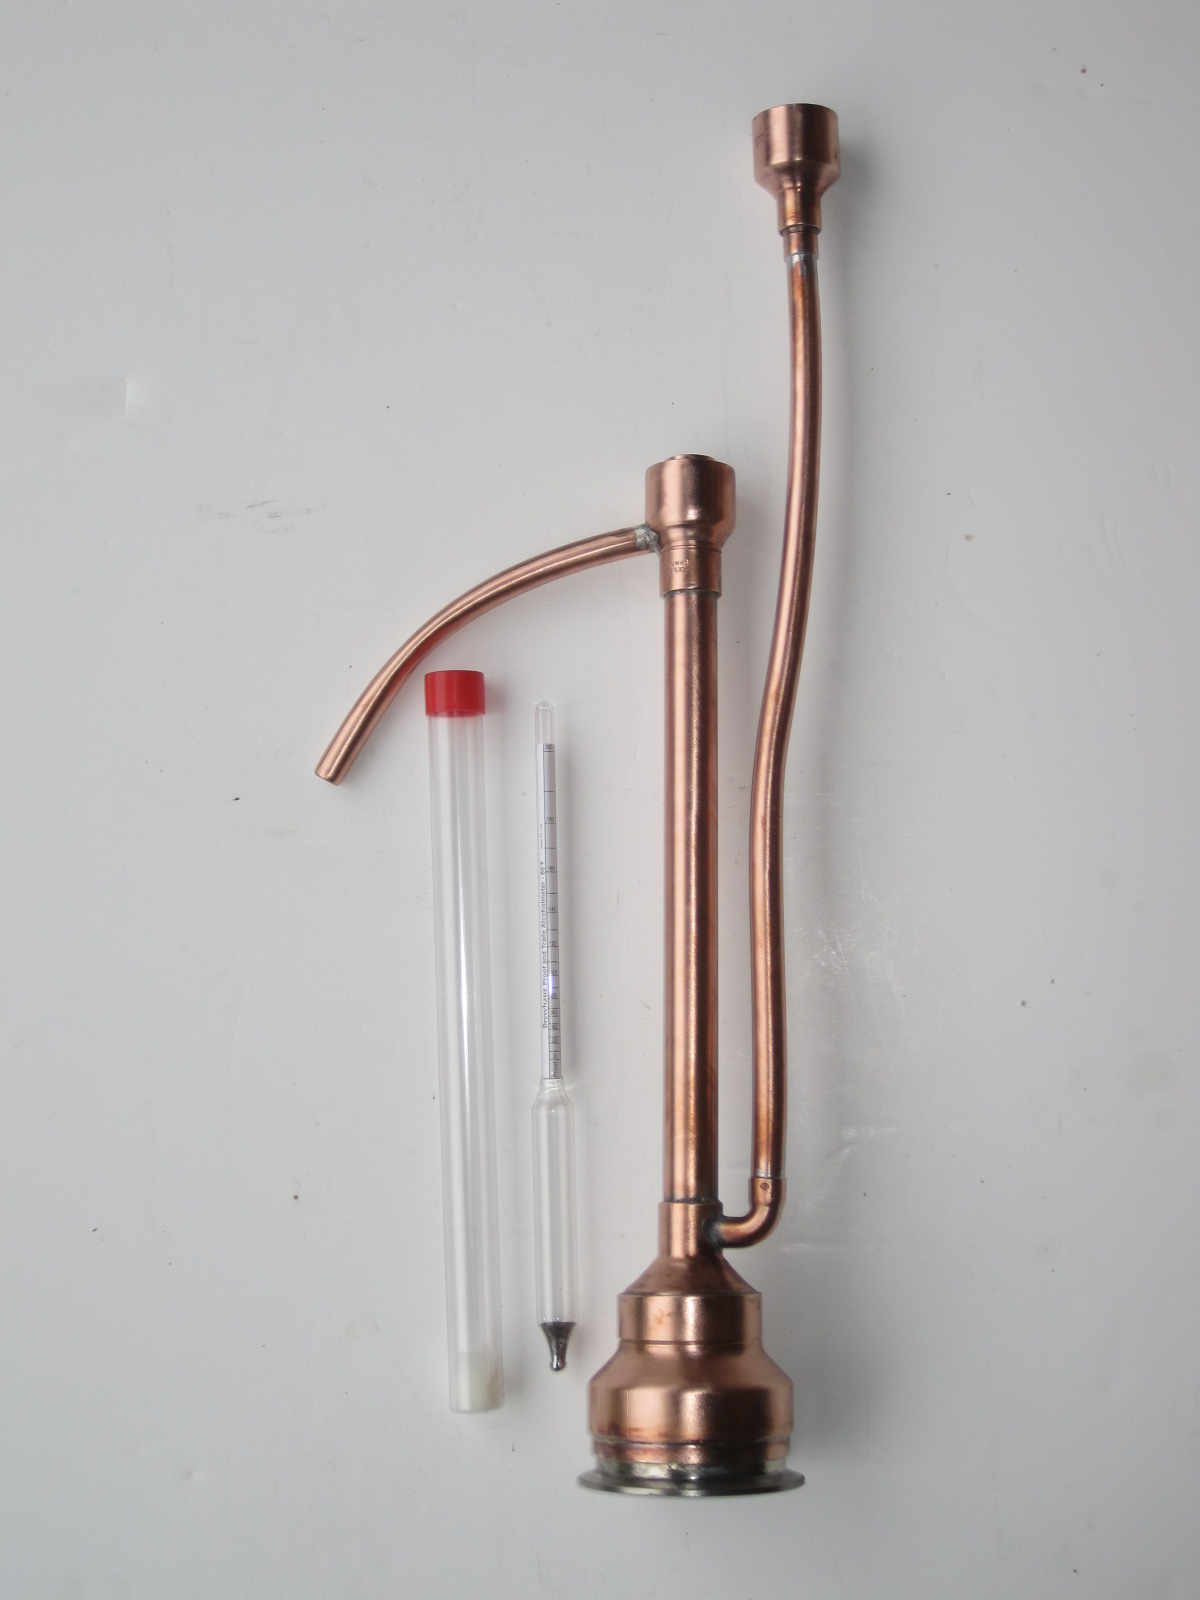 100% Copper proofing parrot for moonshine e85 water distilling  